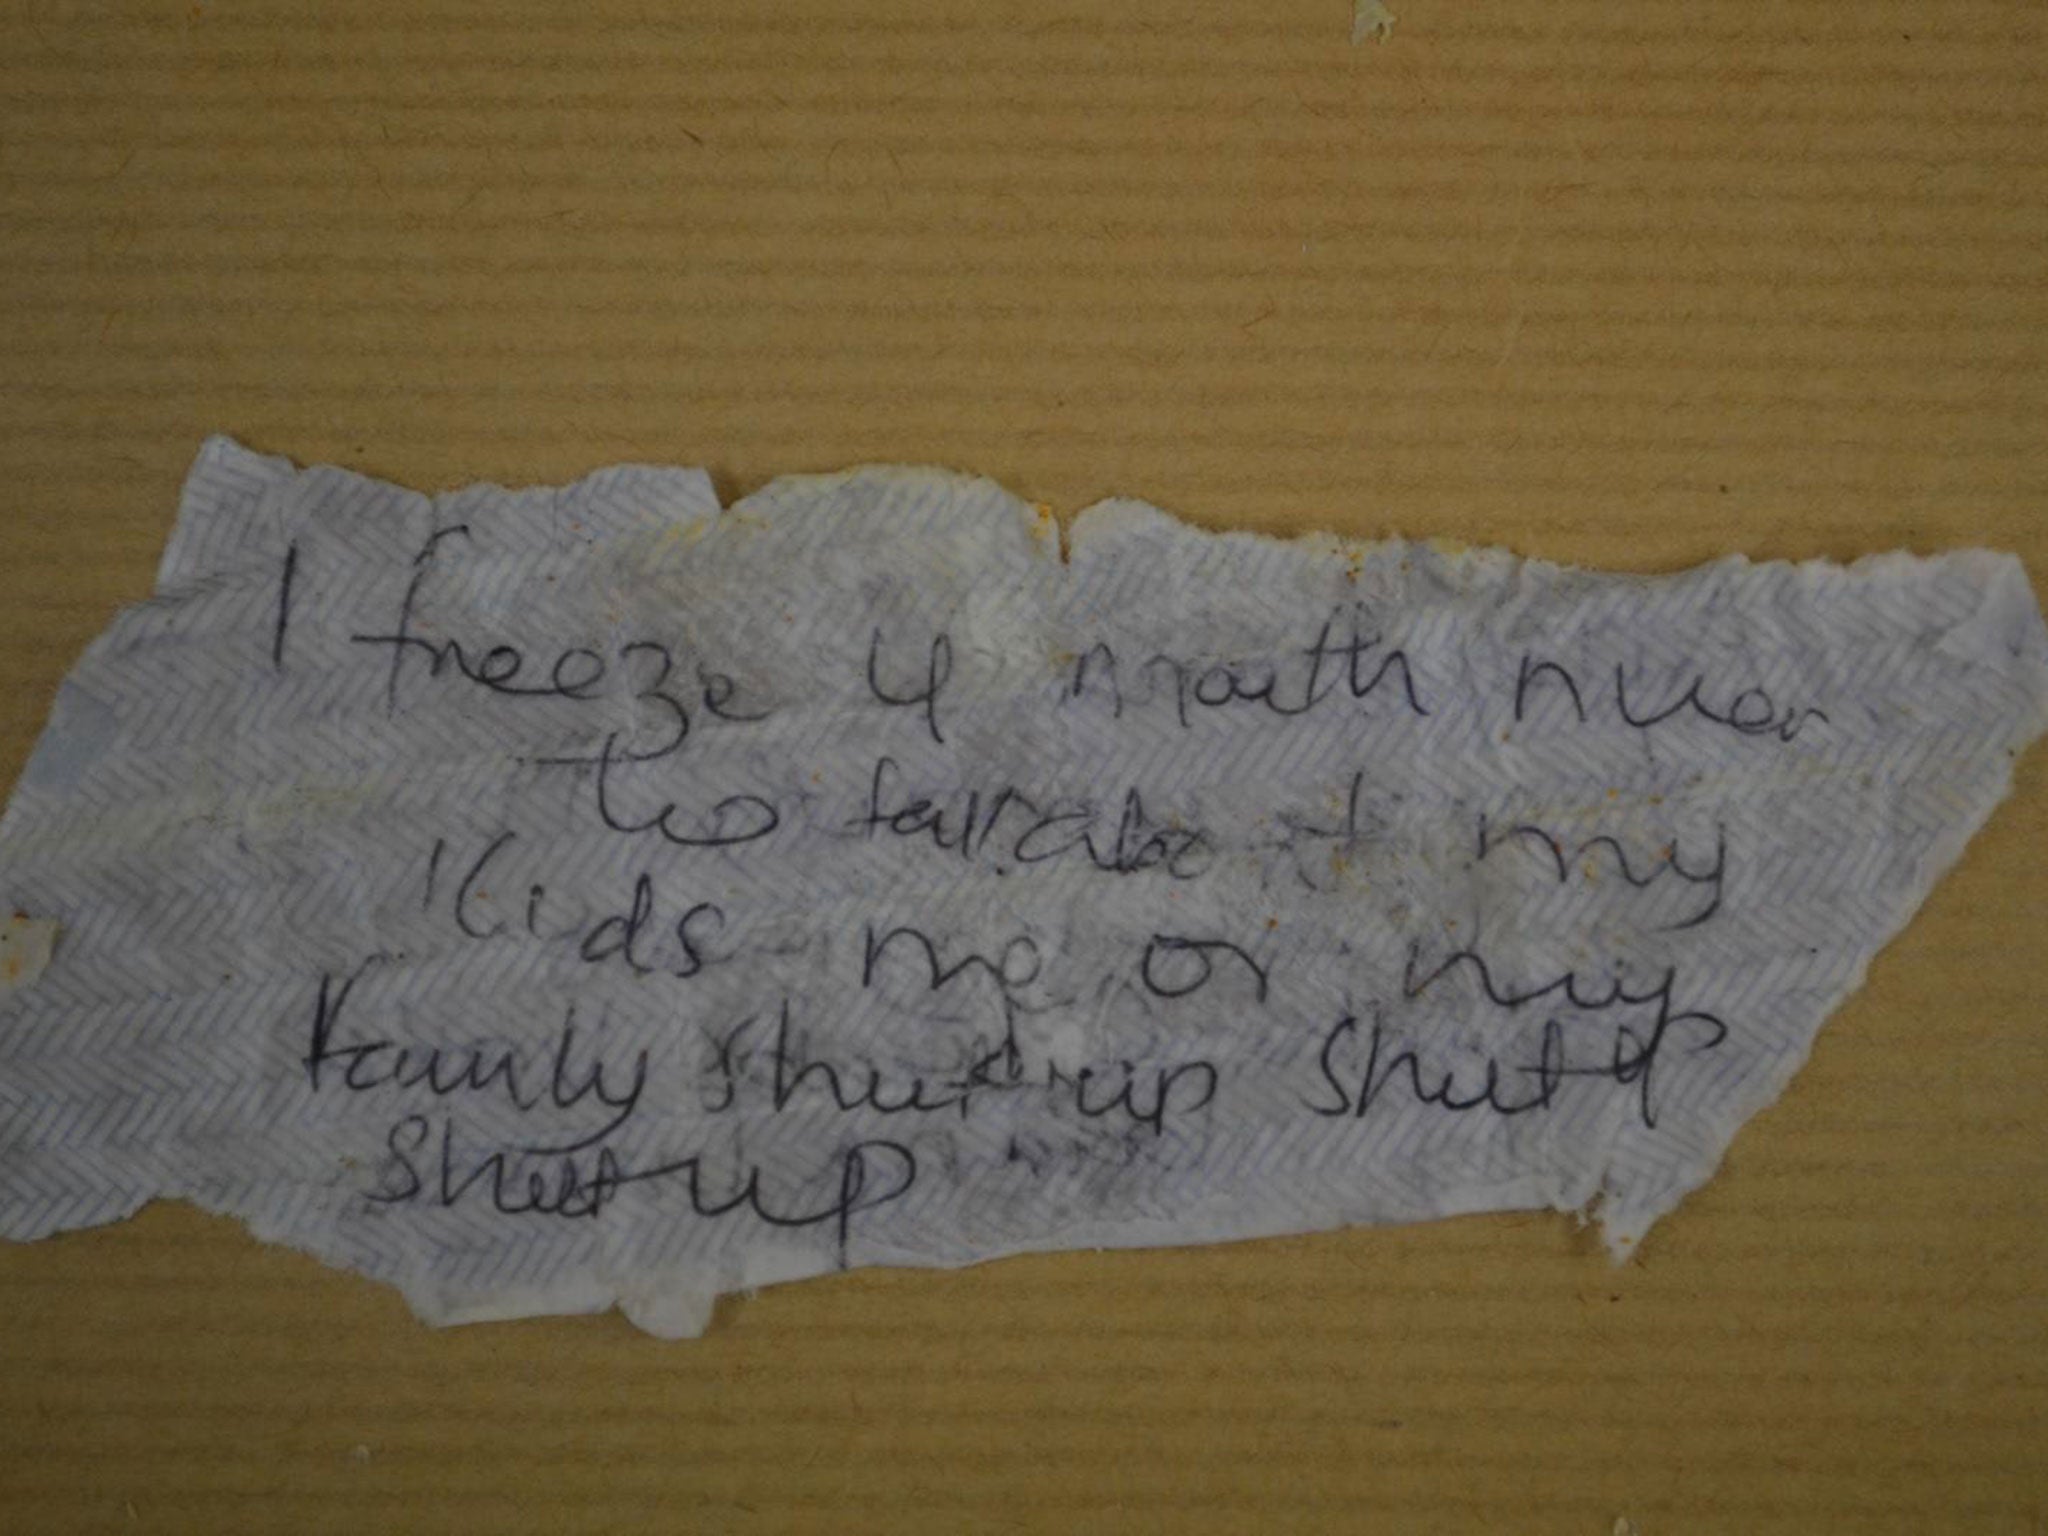 One of the notes left in a lime by the girl's mother as an attempted witchcraft spell